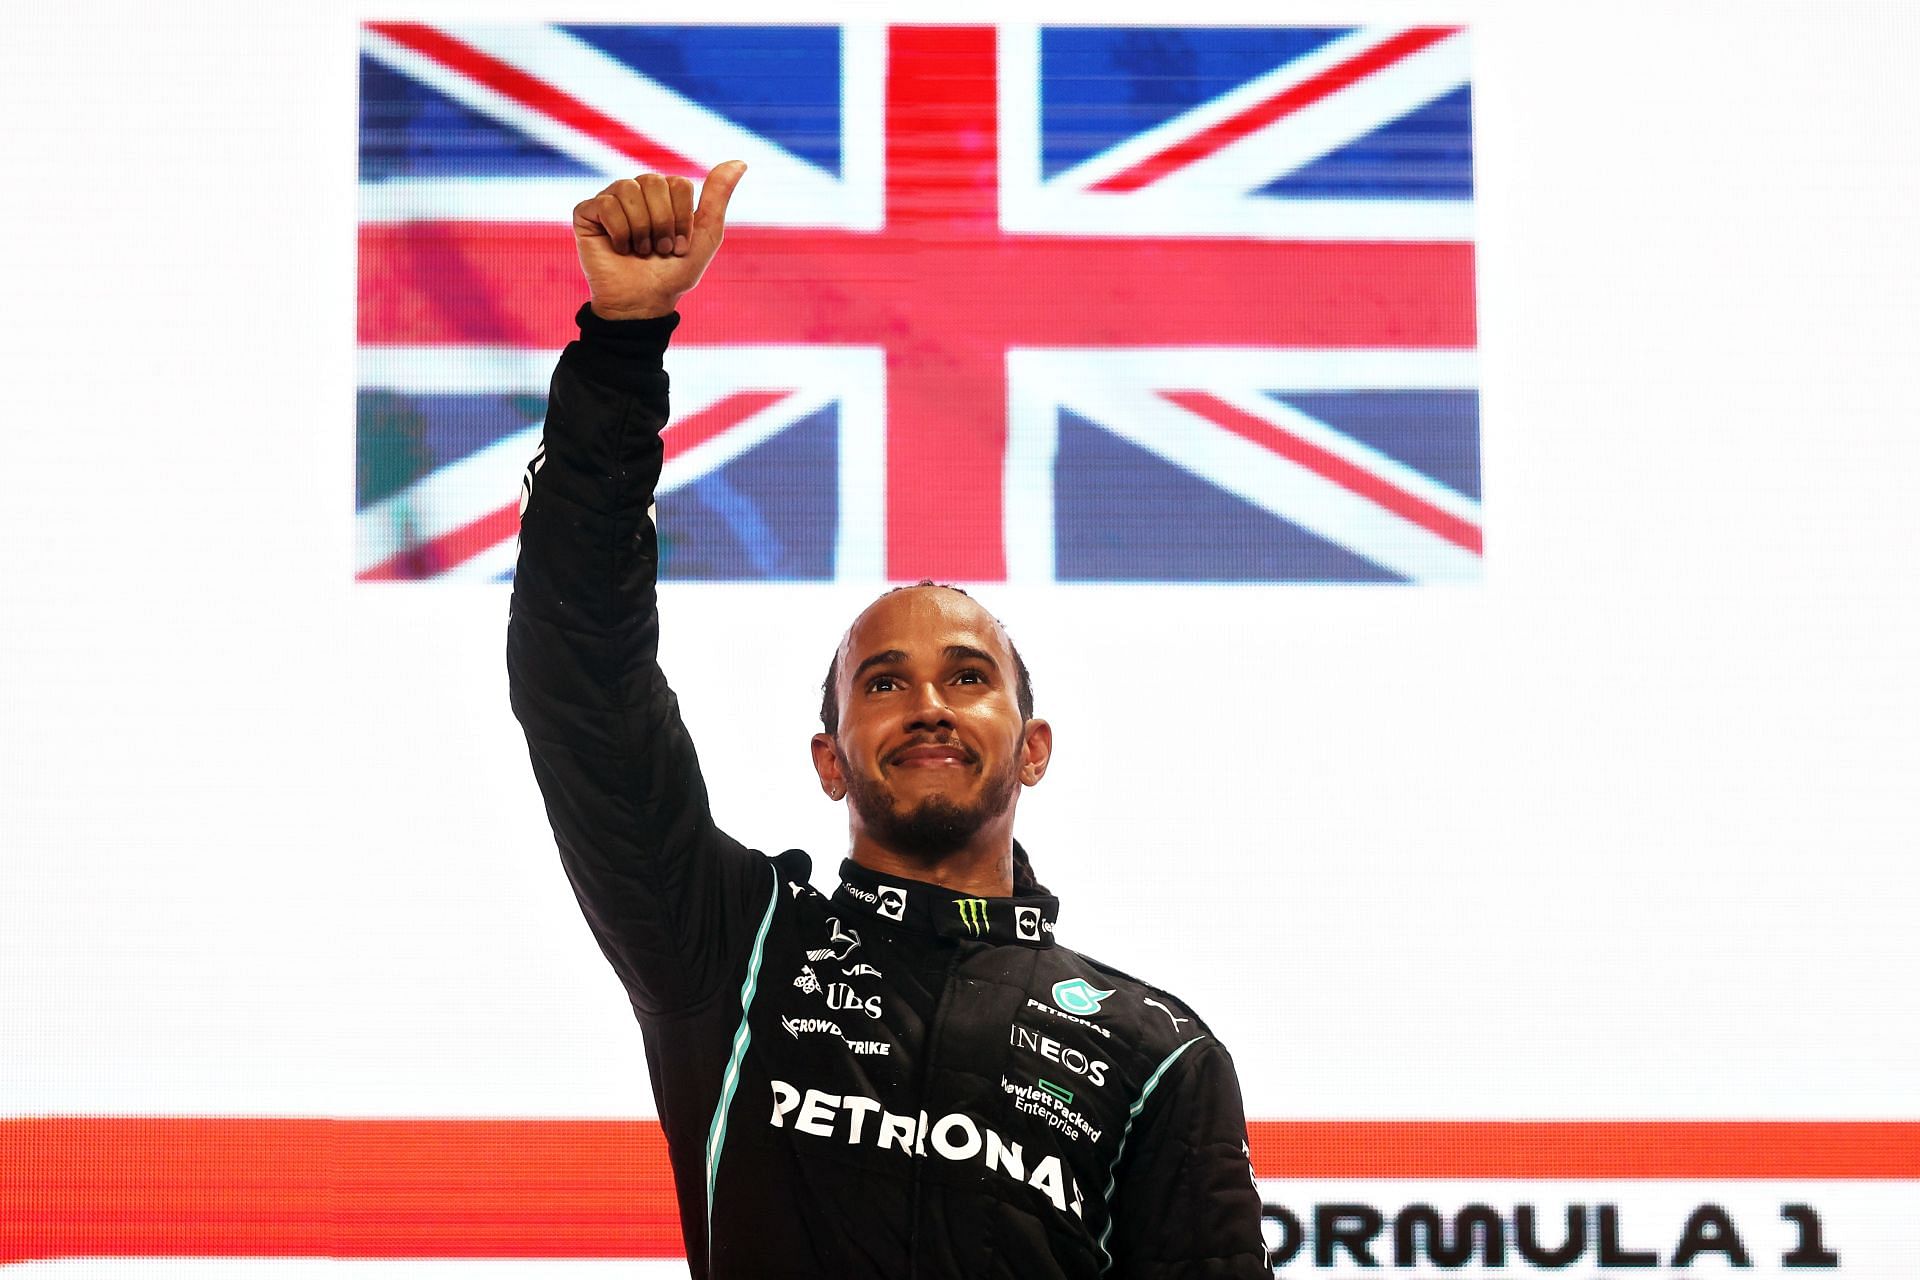 Race winner Lewis Hamilton celebrates on the podium during the Qatar Gp. (Photo by Lars Baron/Getty Images)